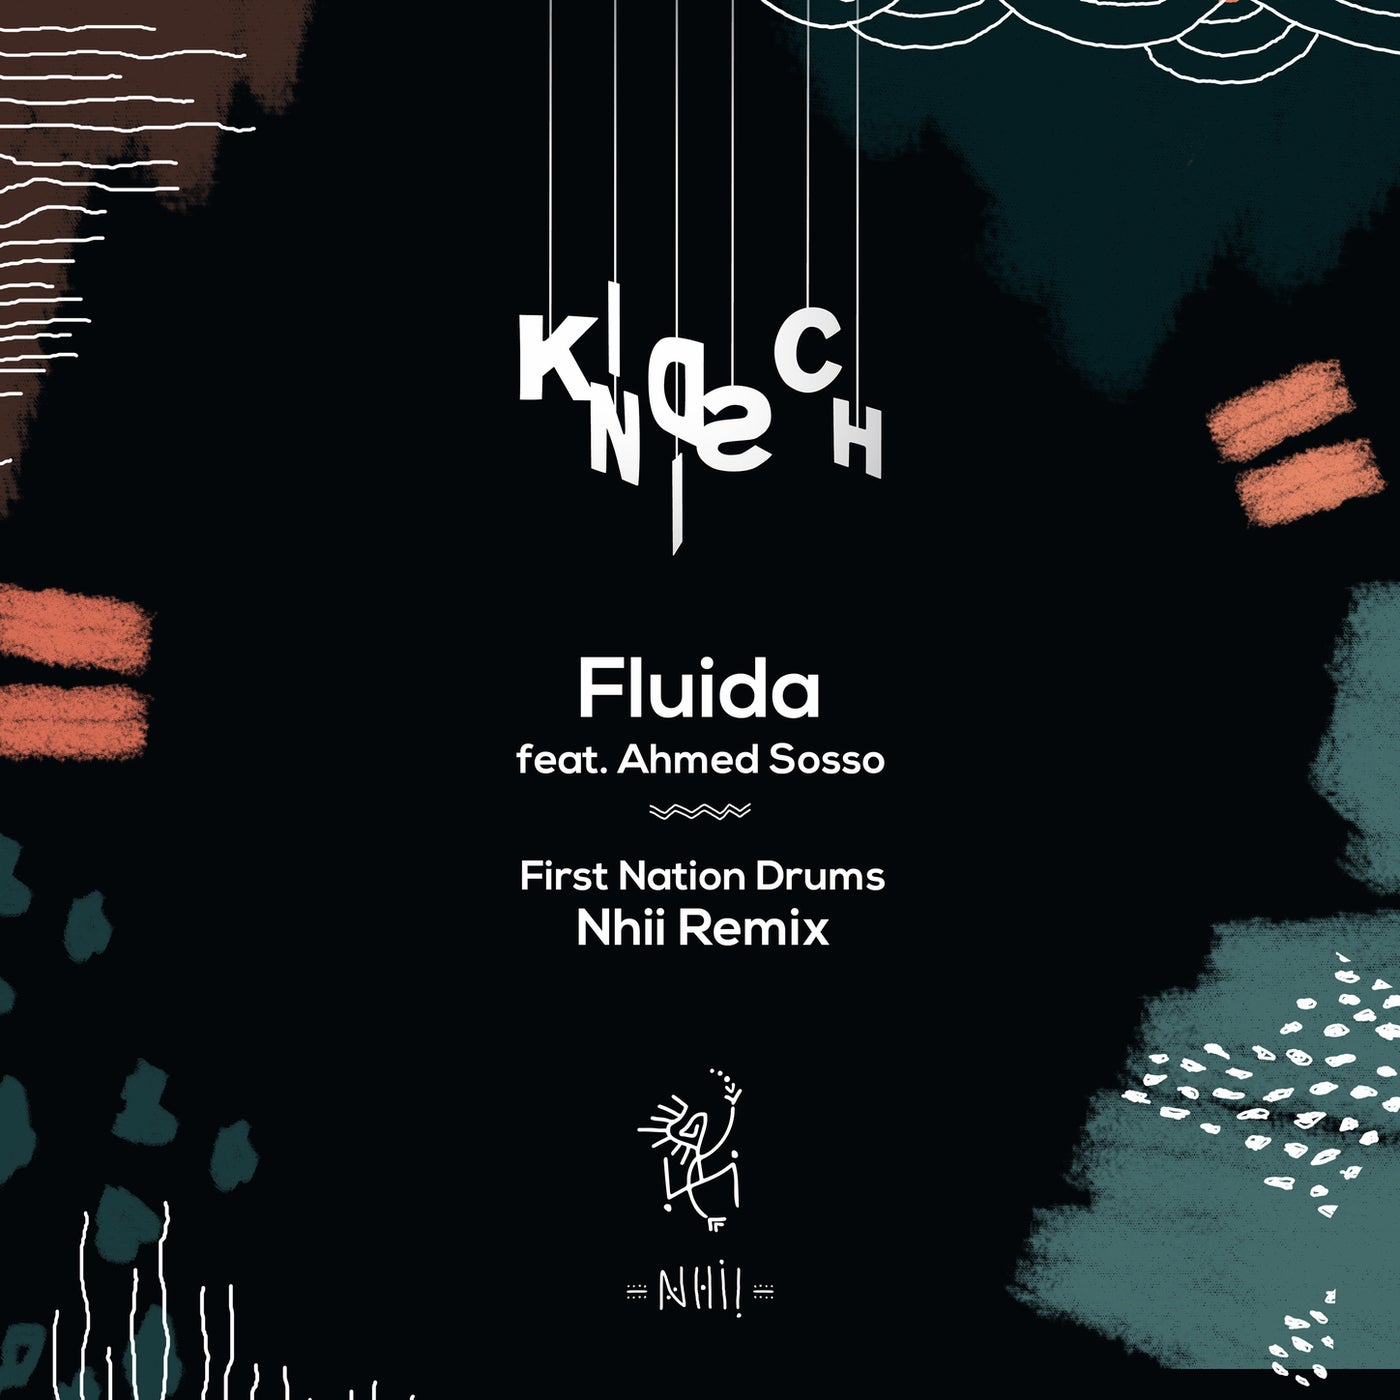 Fluida - First Nation Drums feat. Ahmed Sosso (Nhii Remix)